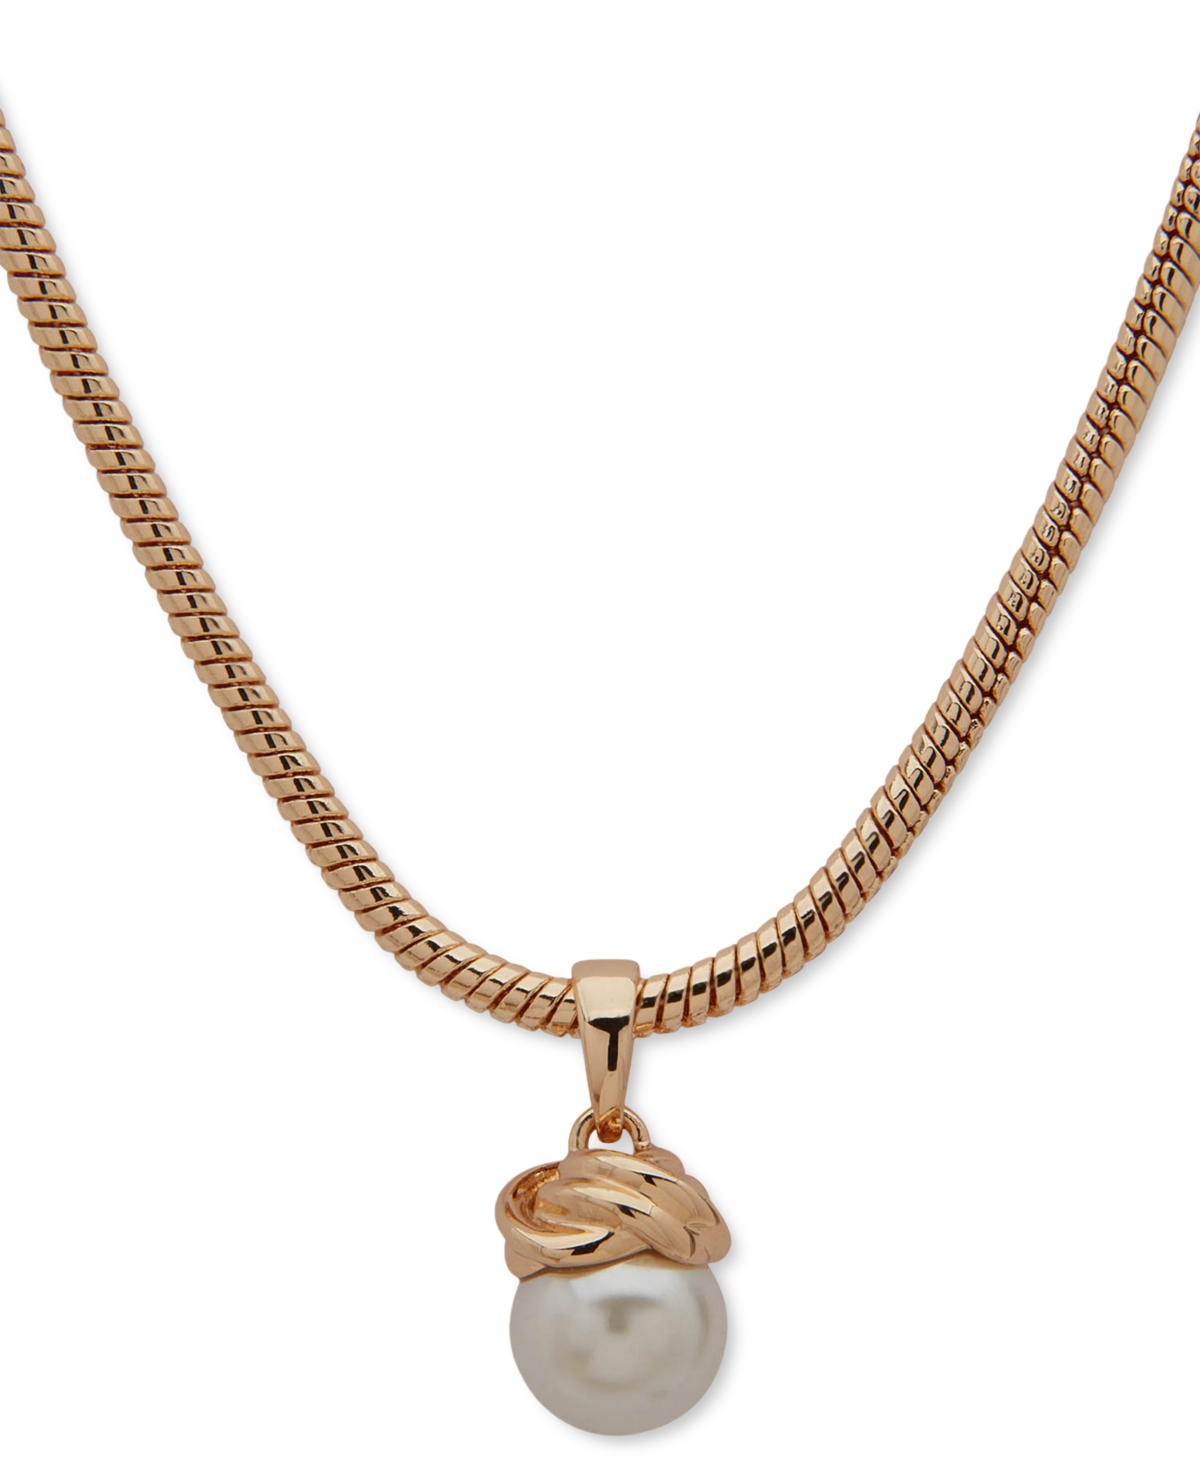 Gold-Tone Imitation Pearl Knot Pendant Necklace, 16" + 3" extender - Crystal